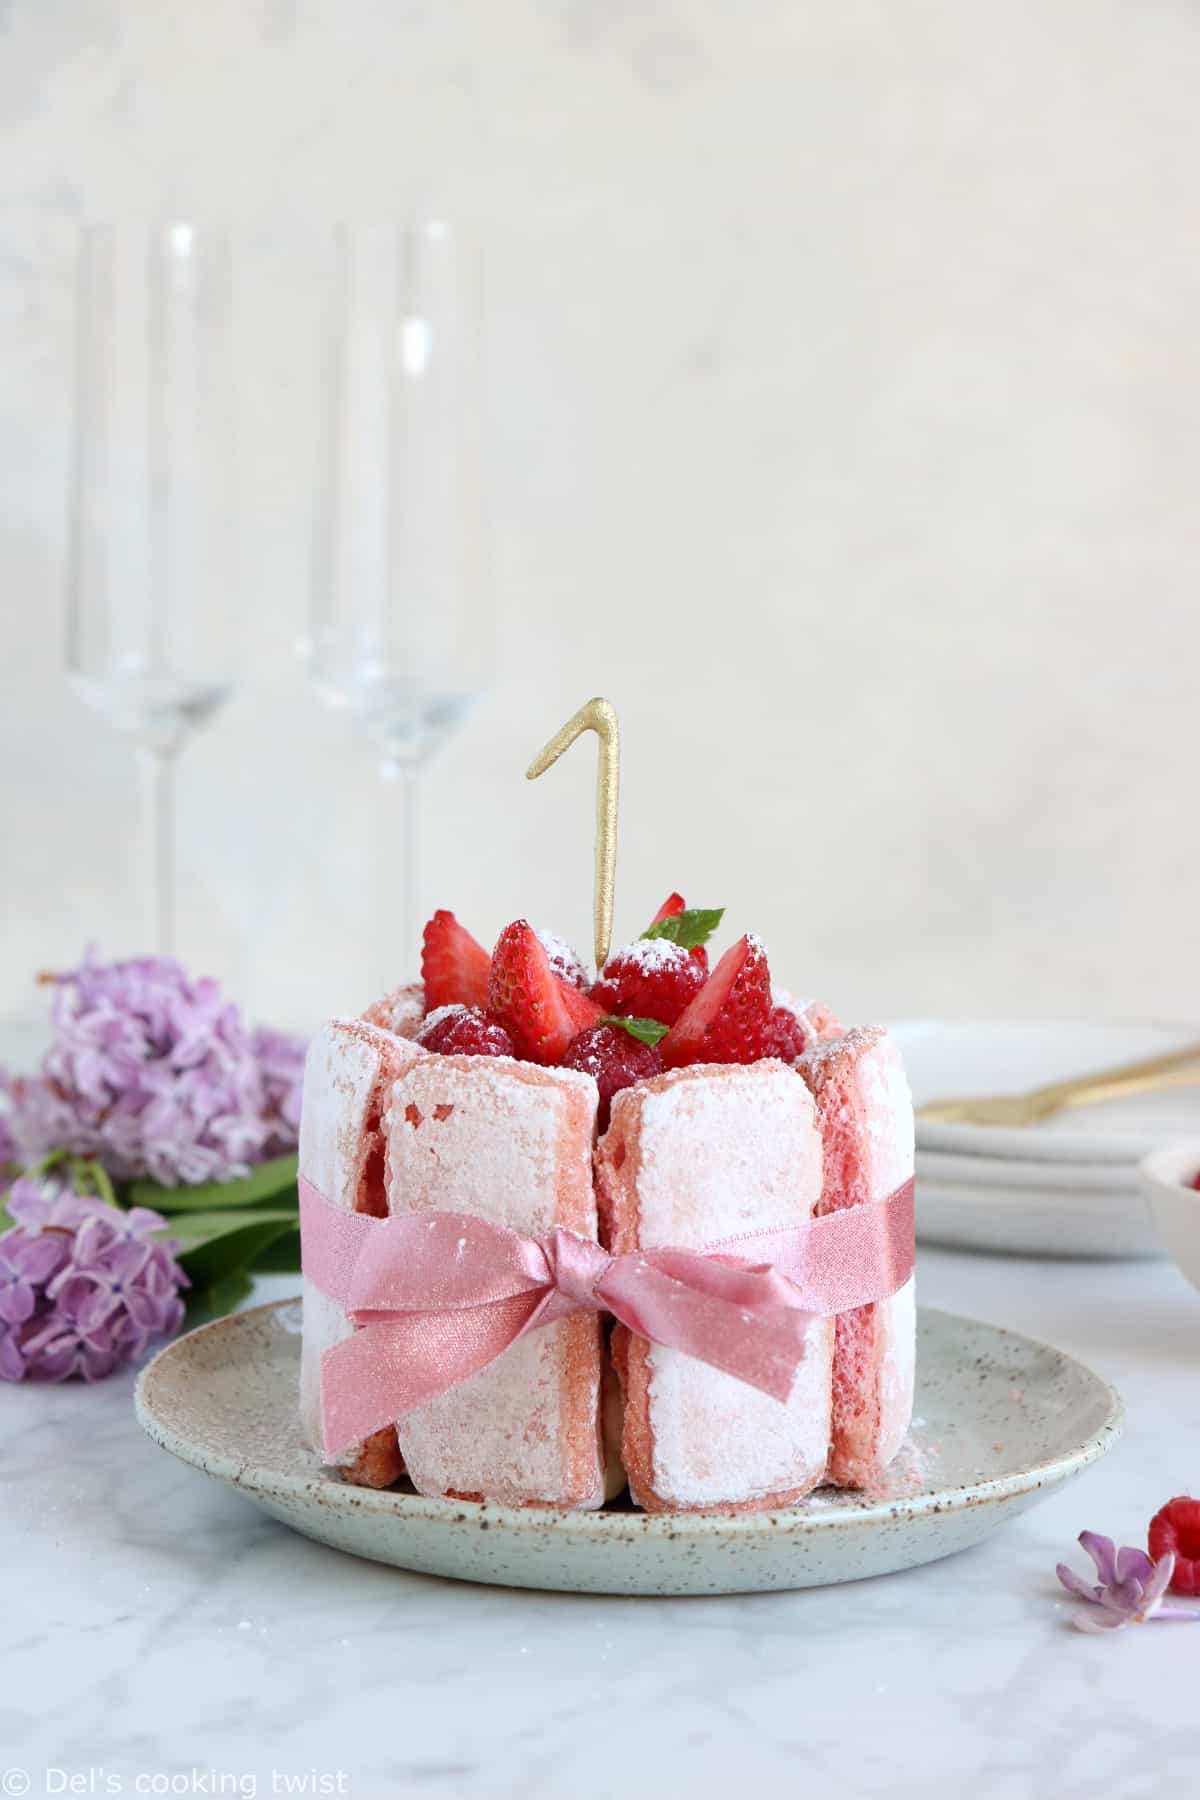 Fancy, elegant and stunningly beautiful, the French strawberry charlotte cake ("Charlotte aux Fraises") with white chocolate makes a delicious celebration cake.